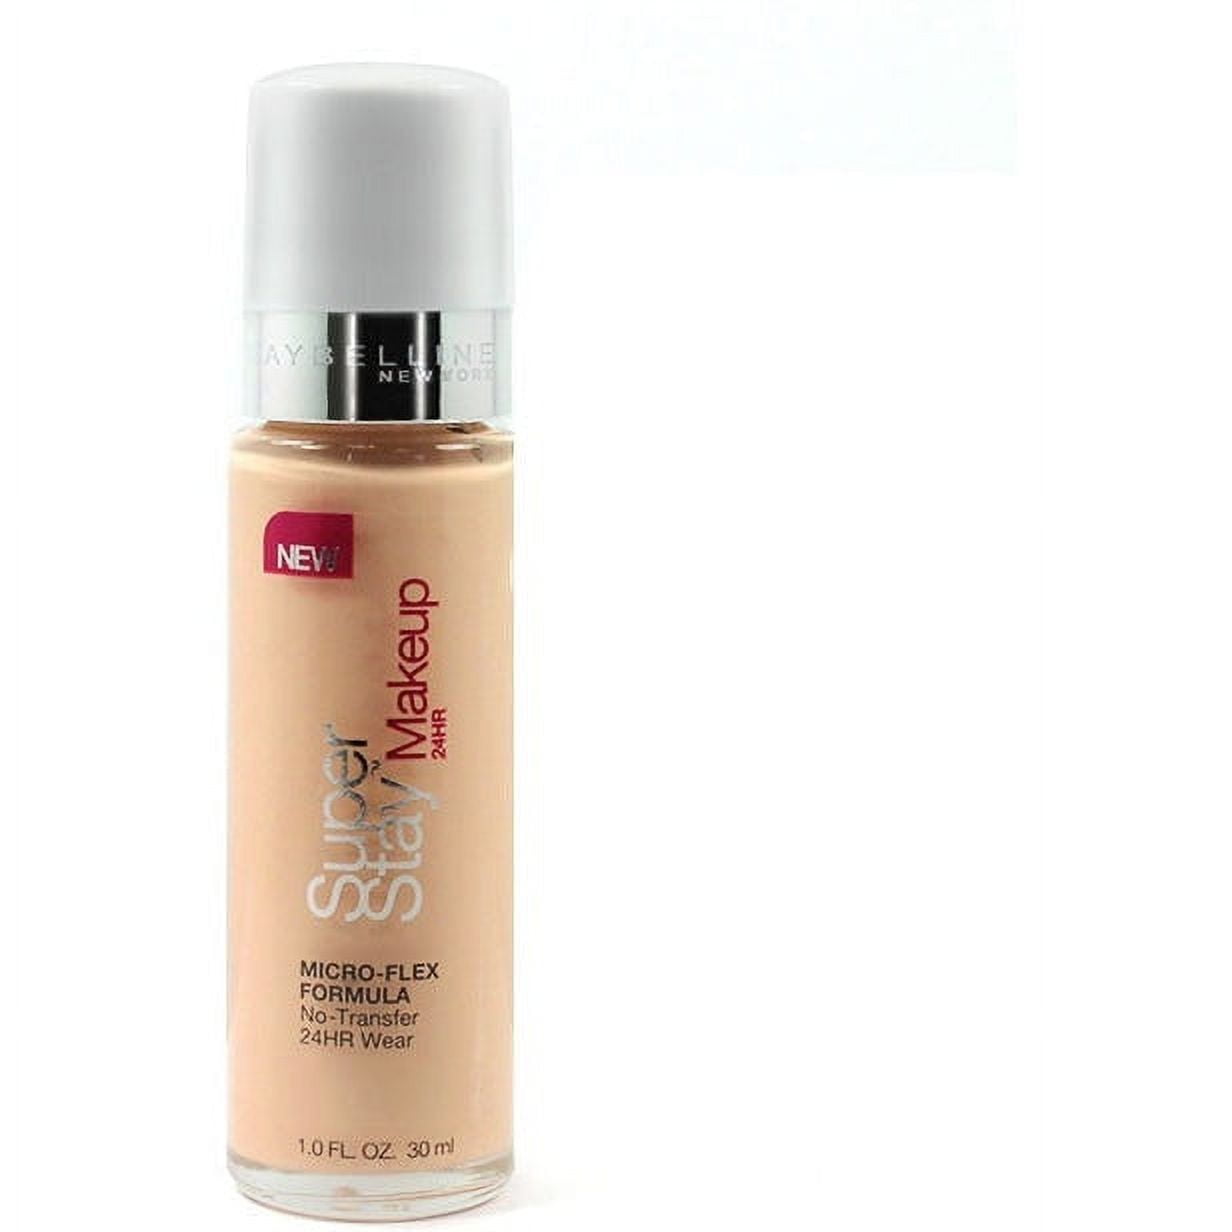 Maybelline New York Super Stay 24Hr Makeup, Nude, 1 Fluid Ounce, Pack of 2